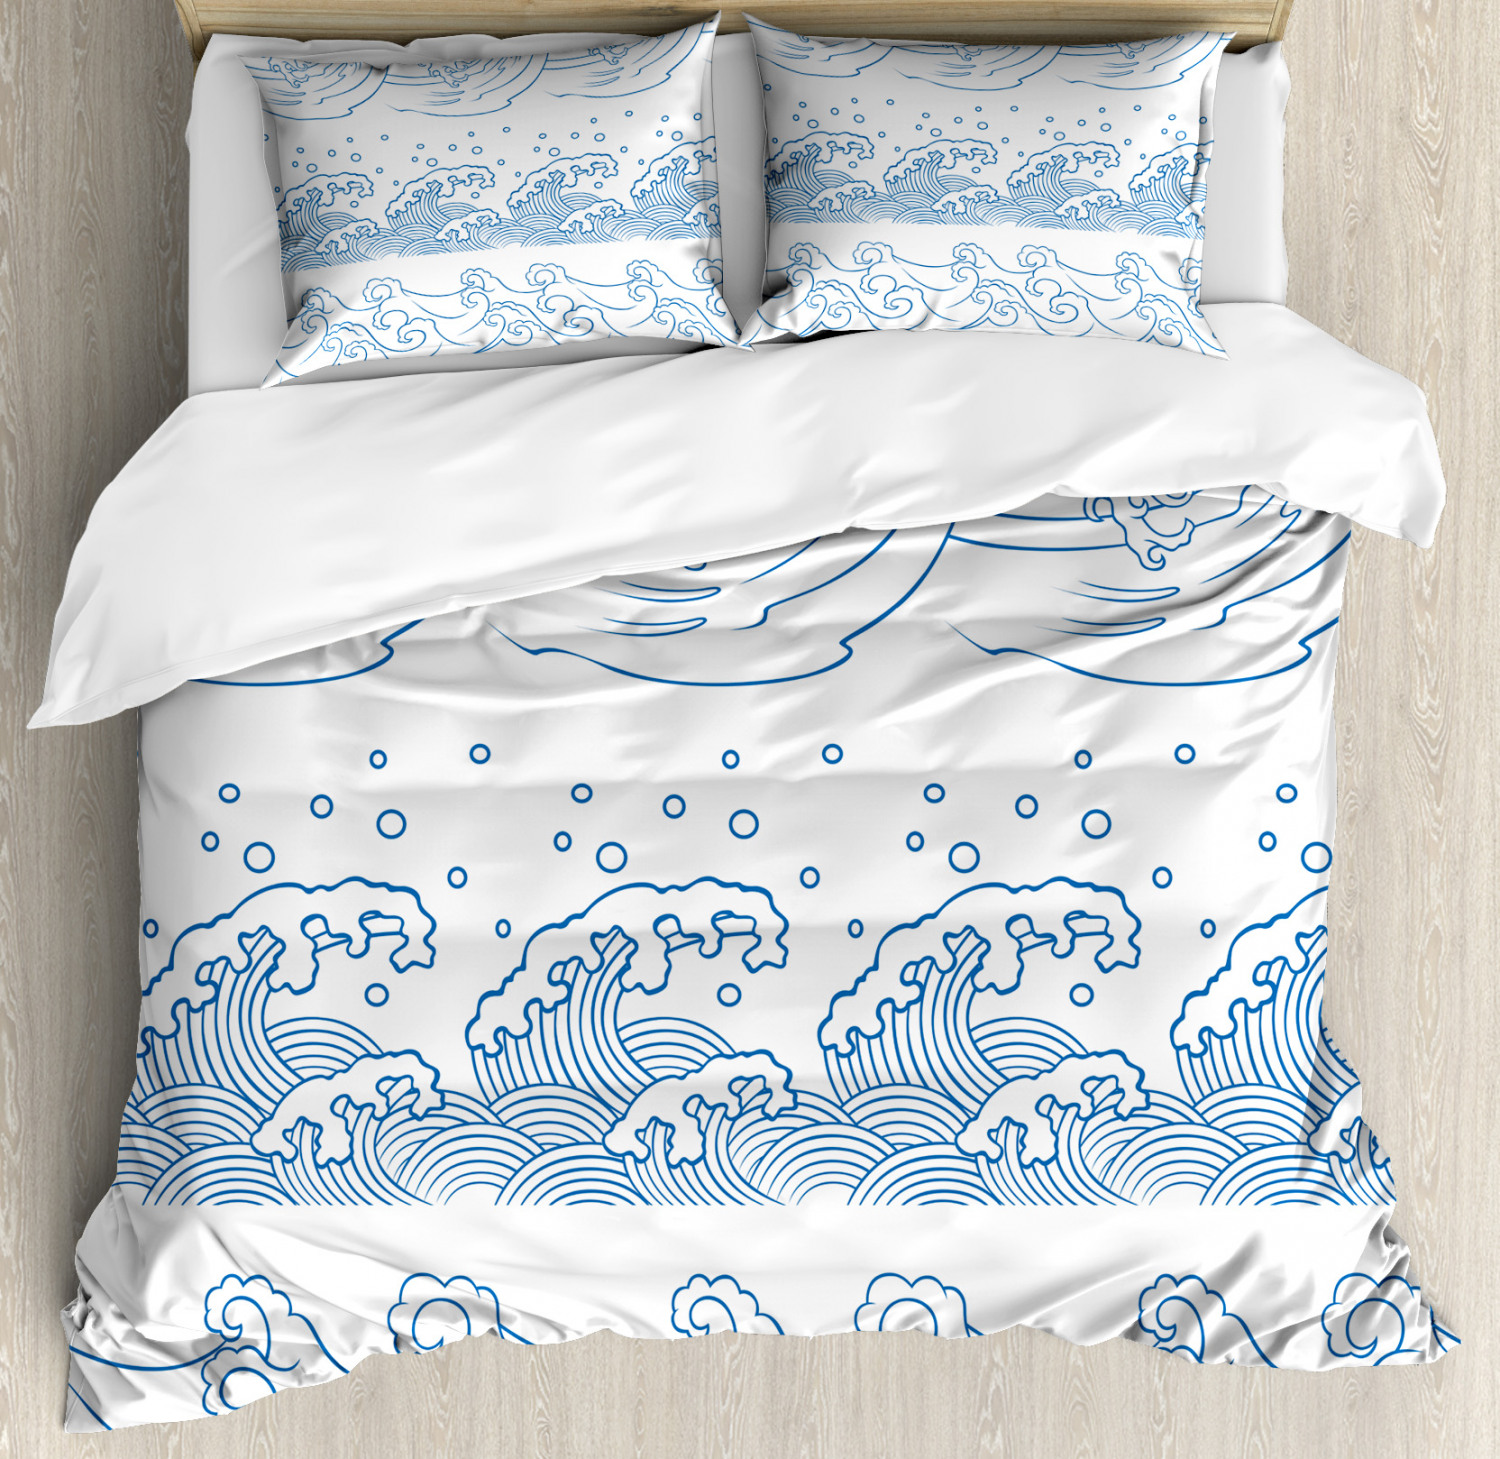 Japanese Anti-ticked anti-bacterial and deodorized Comforter Semi-Double. 